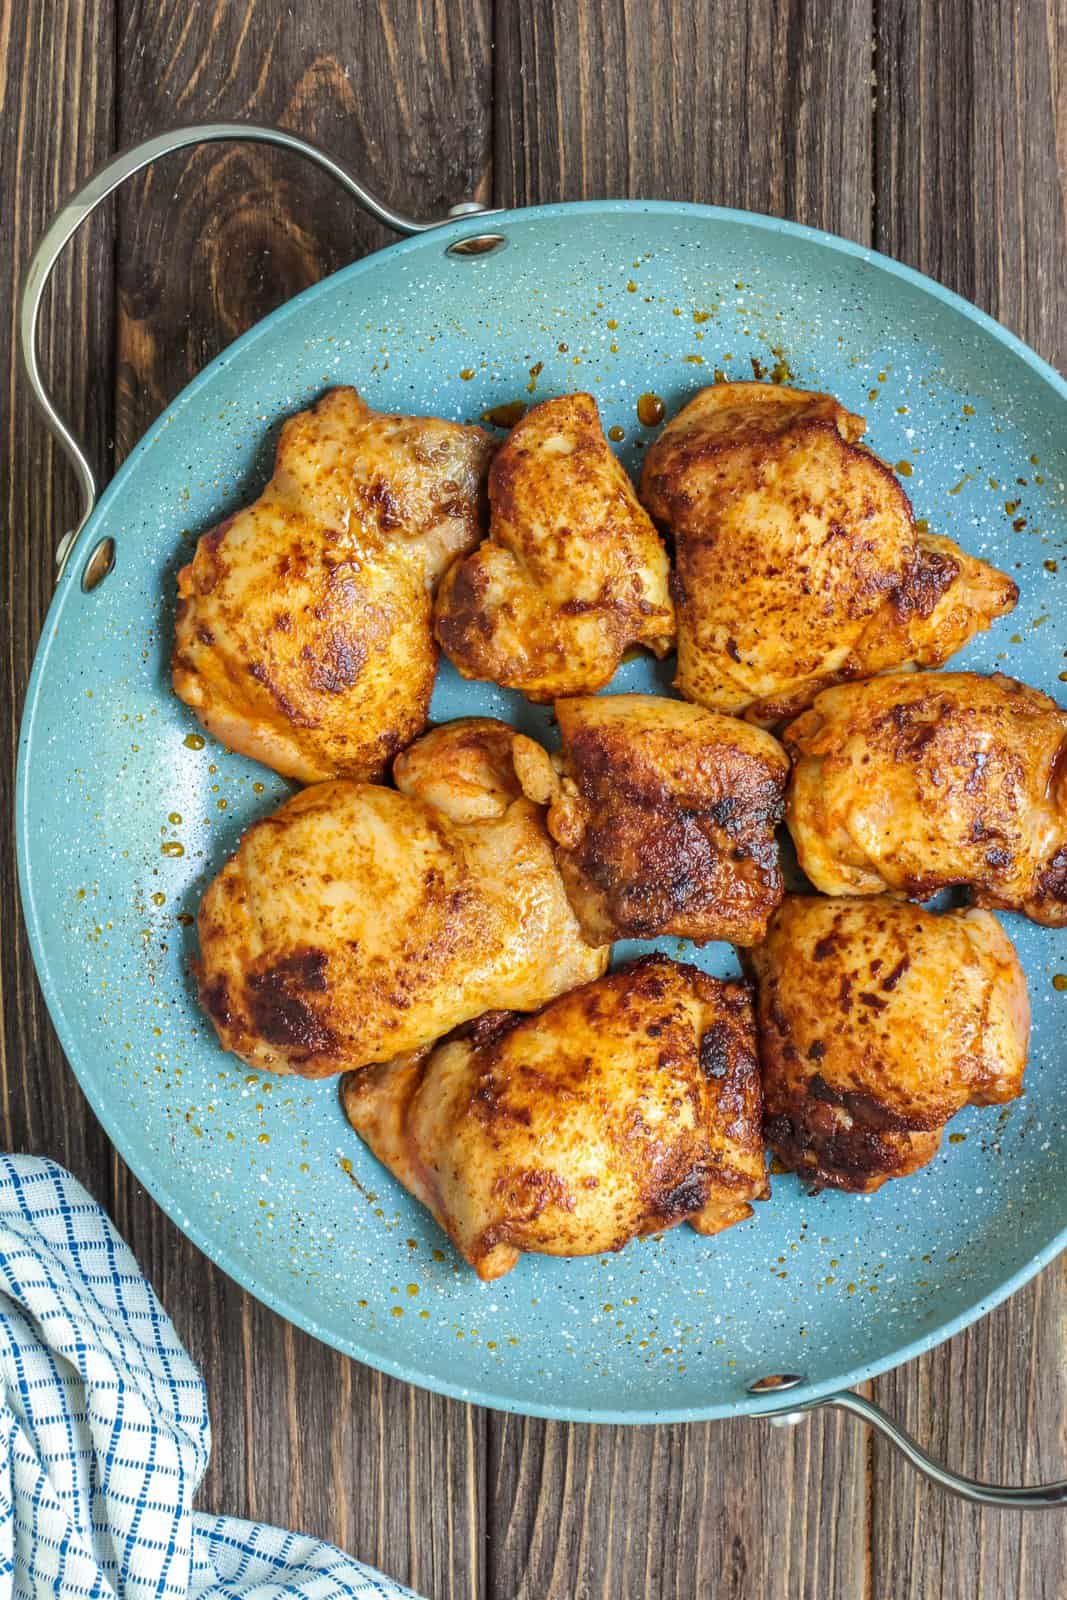 Chicken thighs cooked in pan.